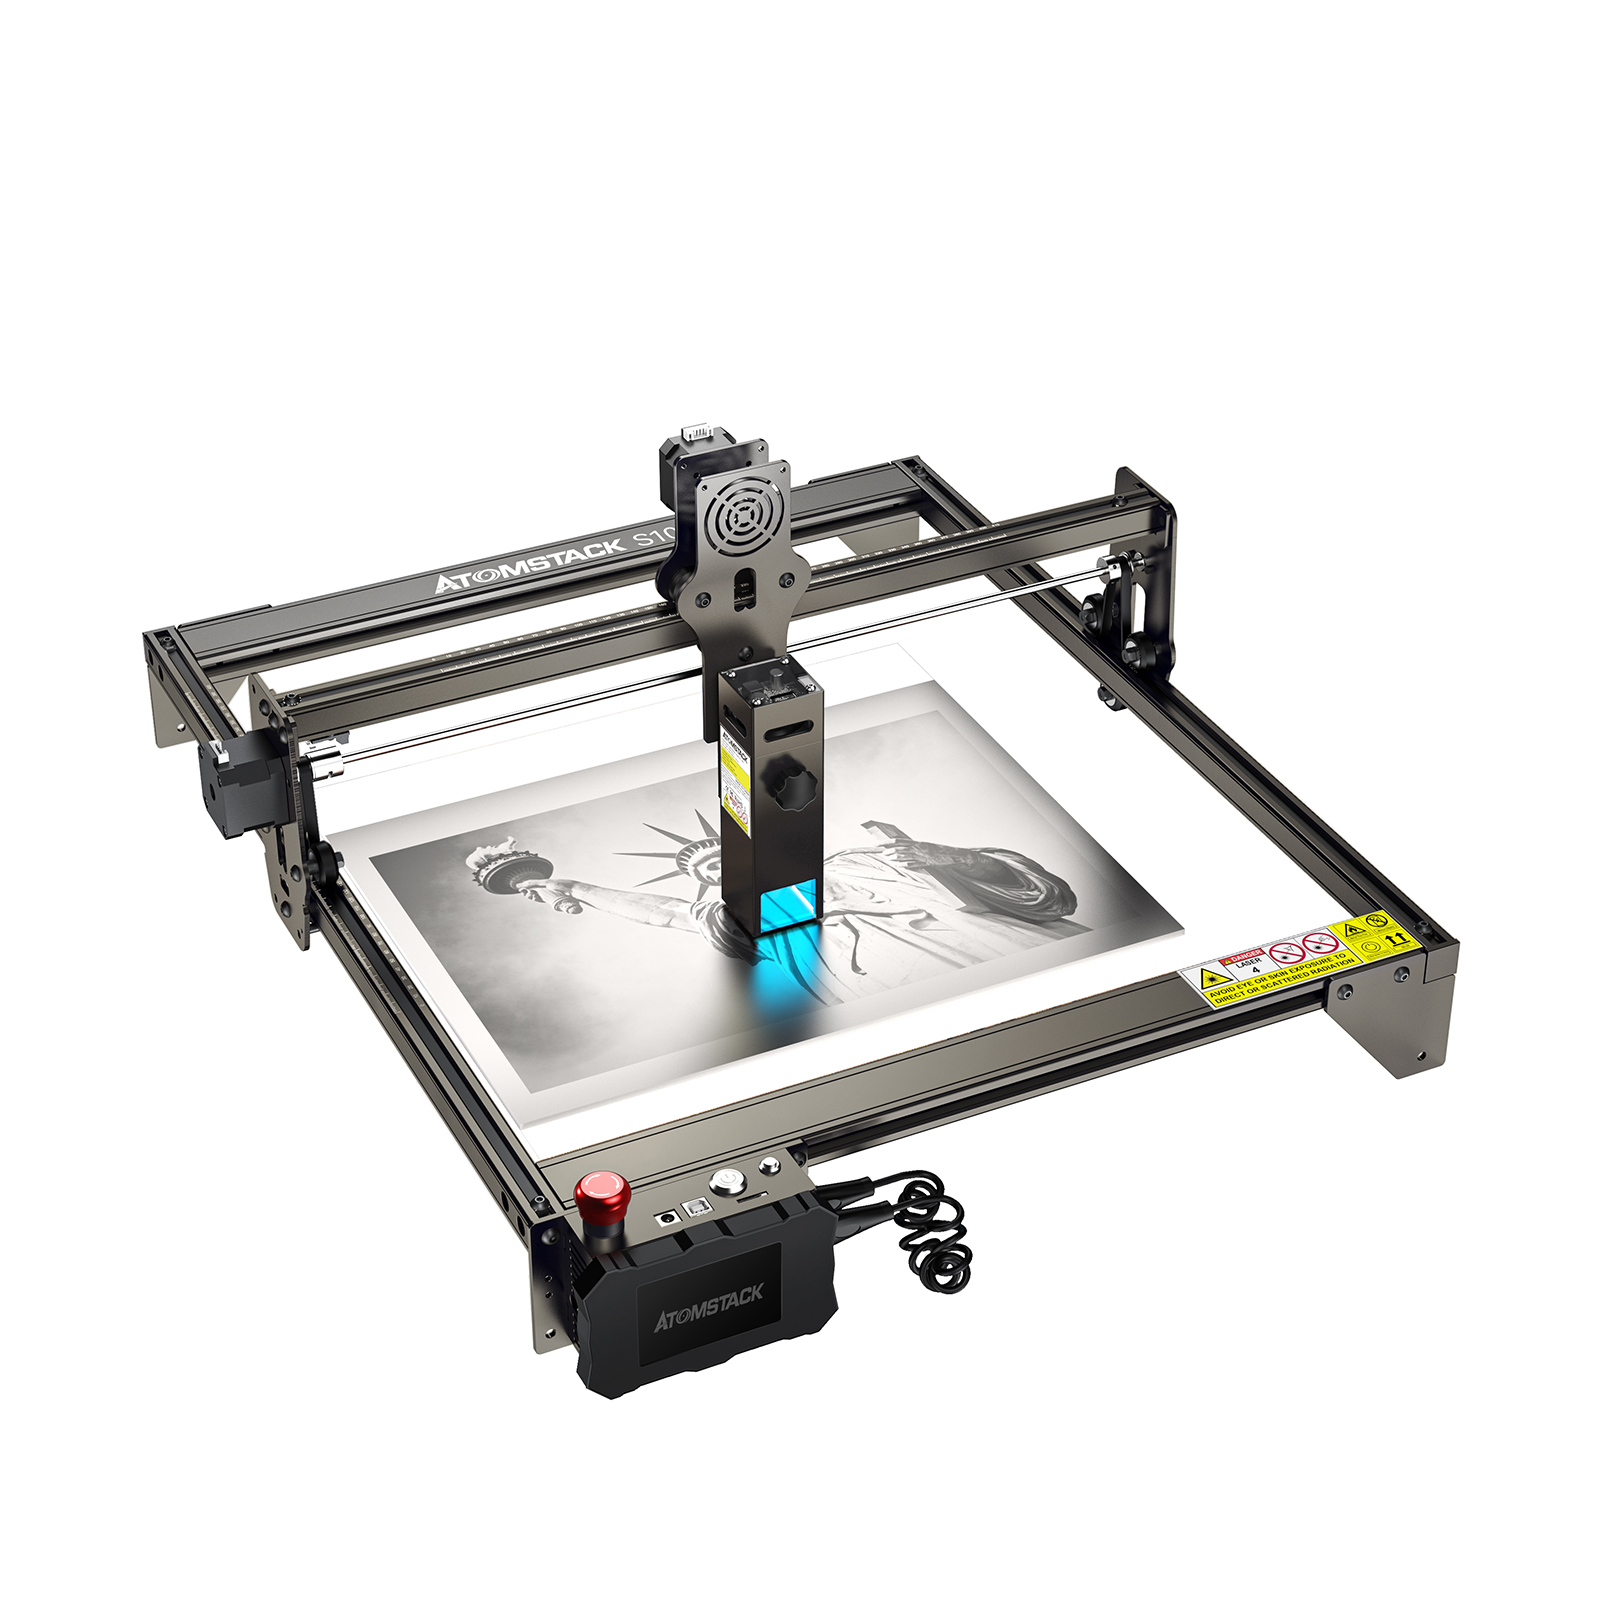 Find New ATOMSTACK S10 PRO Flagship Dual-Laser Laser Engraving Cutting Machine Support Offline Engraving Laser Engraver Cutter 10W Output Power Fixed-Focus 304 Mirror Stainless Steel Engraving Metal Acrylic Leather 20mm Wood Cutter DIY Engraver for Sale on Gipsybee.com with cryptocurrencies